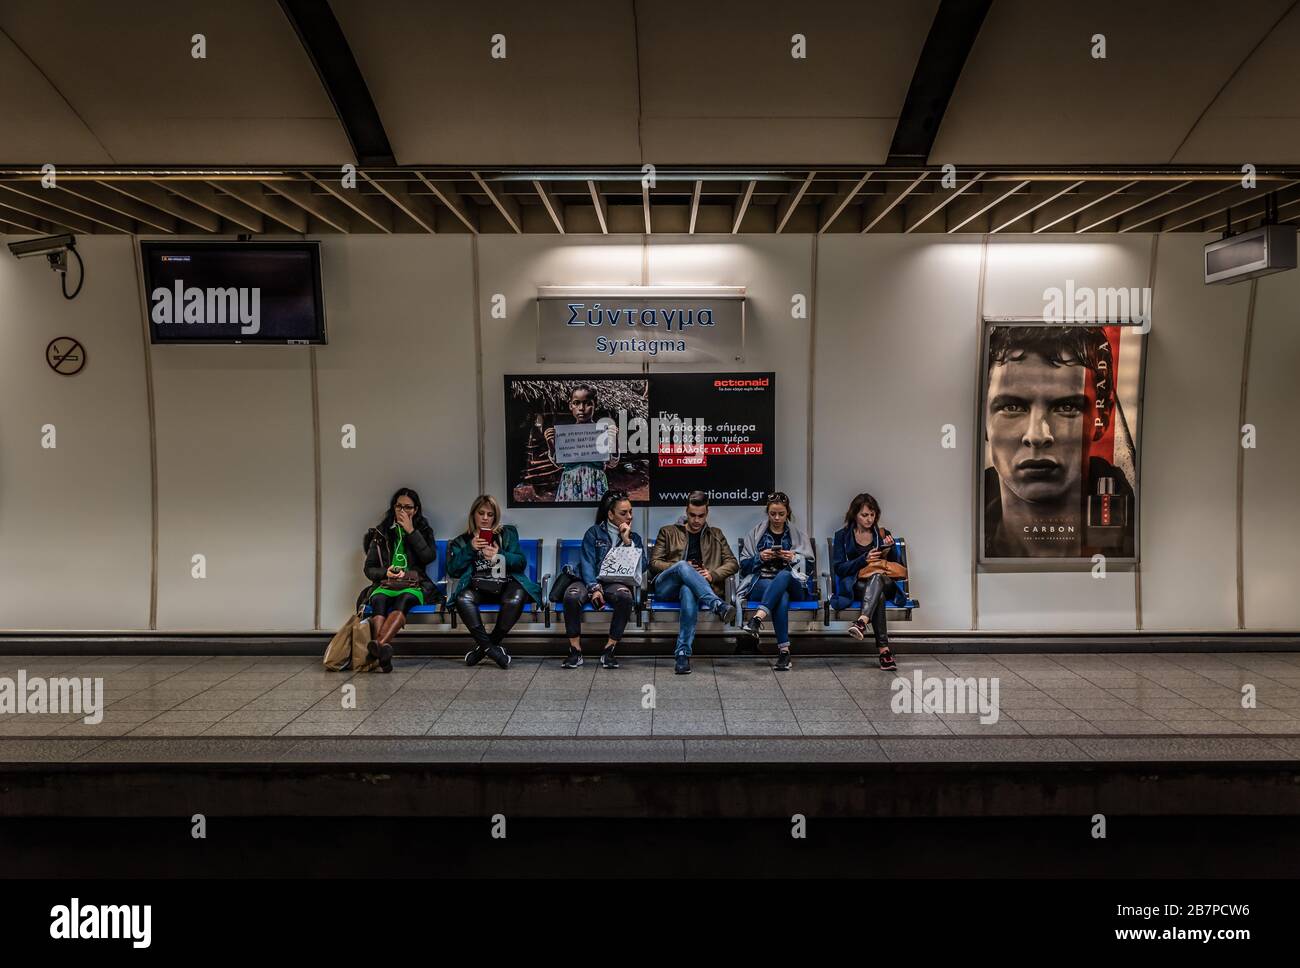 Athens, Attica / Greece - 12 26 2019: Travellers waiting for the local train at the Syntagma metro station platform Stock Photo